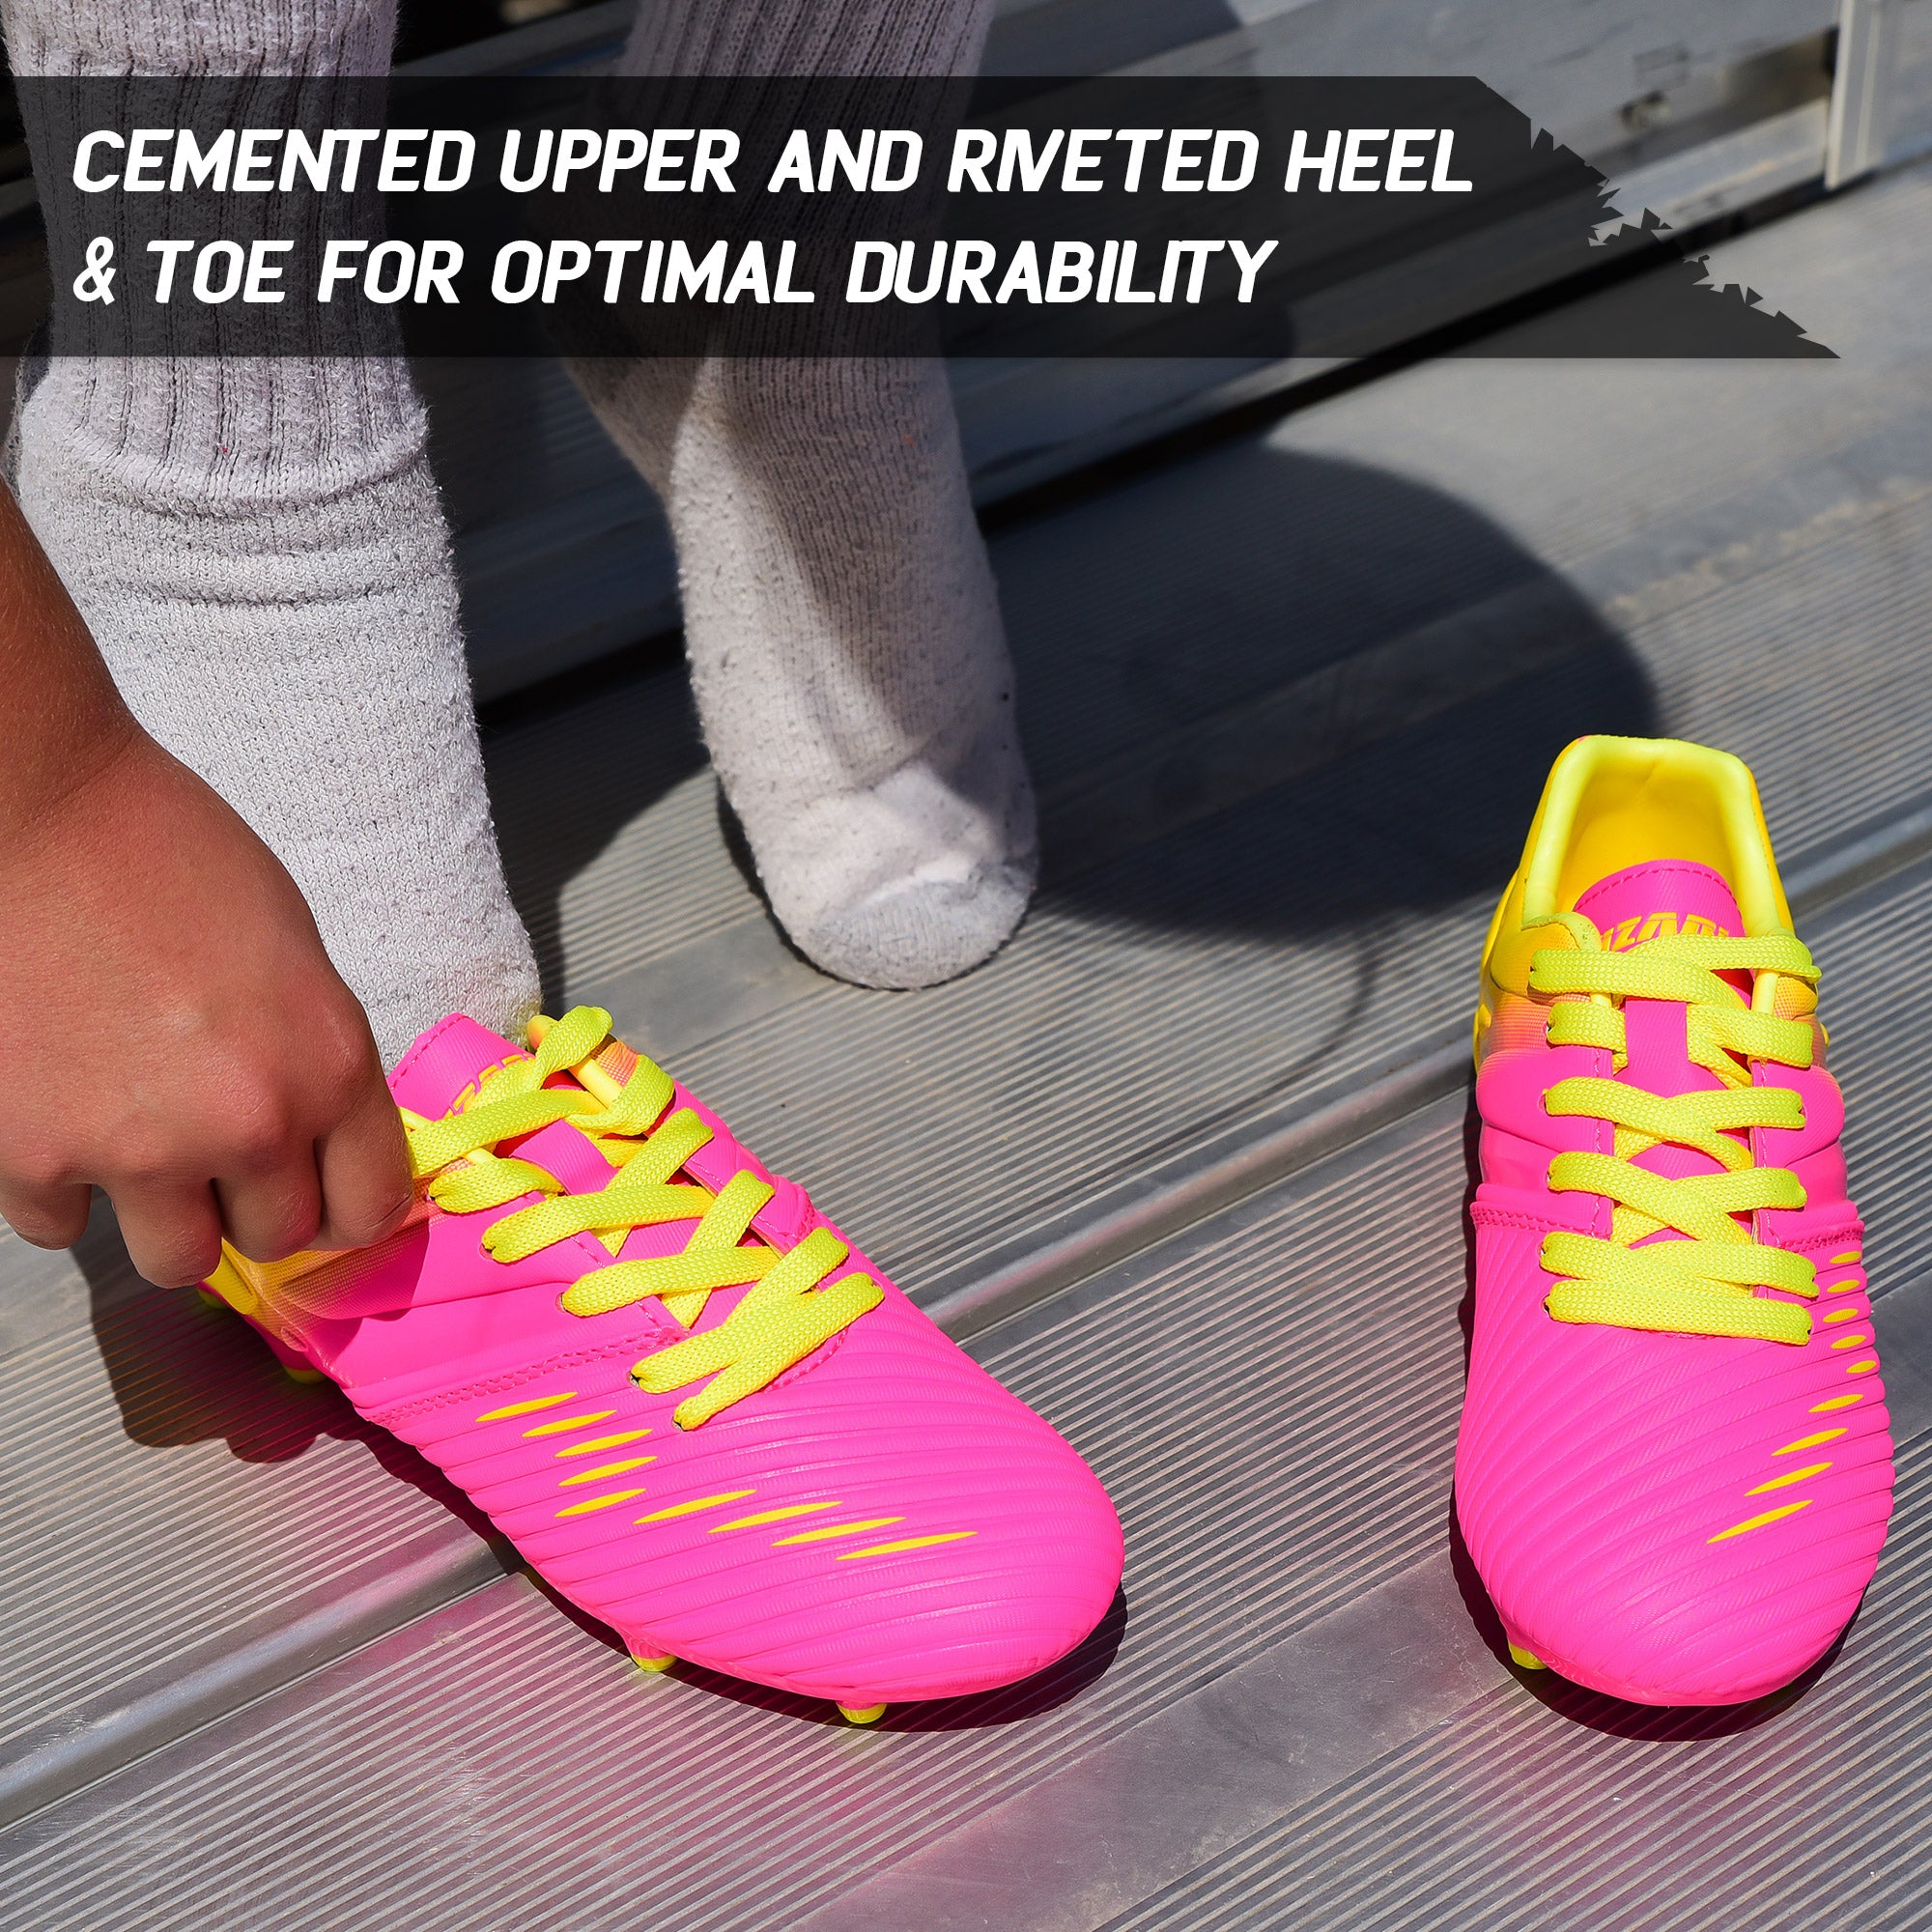 Liga Firm Ground Soccer Shoes - Pink/Yellow